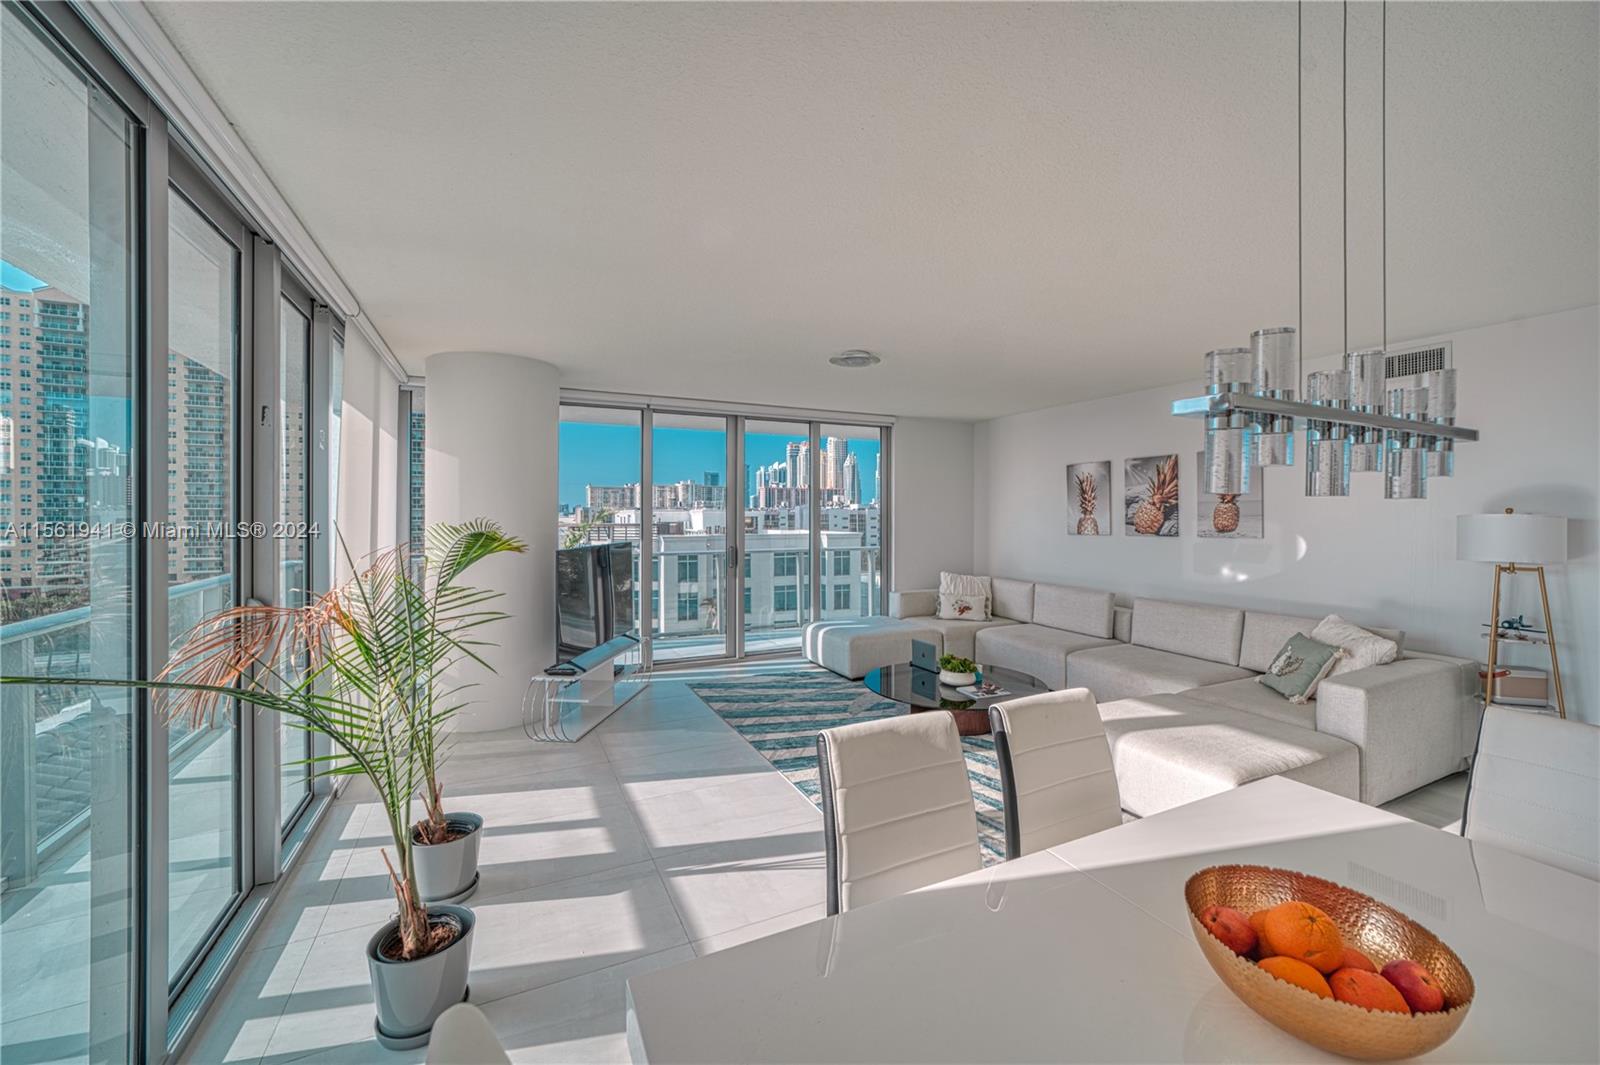 Property for Sale at 330 Sunny Isles Blvd 5-701, Sunny Isles Beach, Miami-Dade County, Florida - Bedrooms: 3 
Bathrooms: 4  - $1,400,000